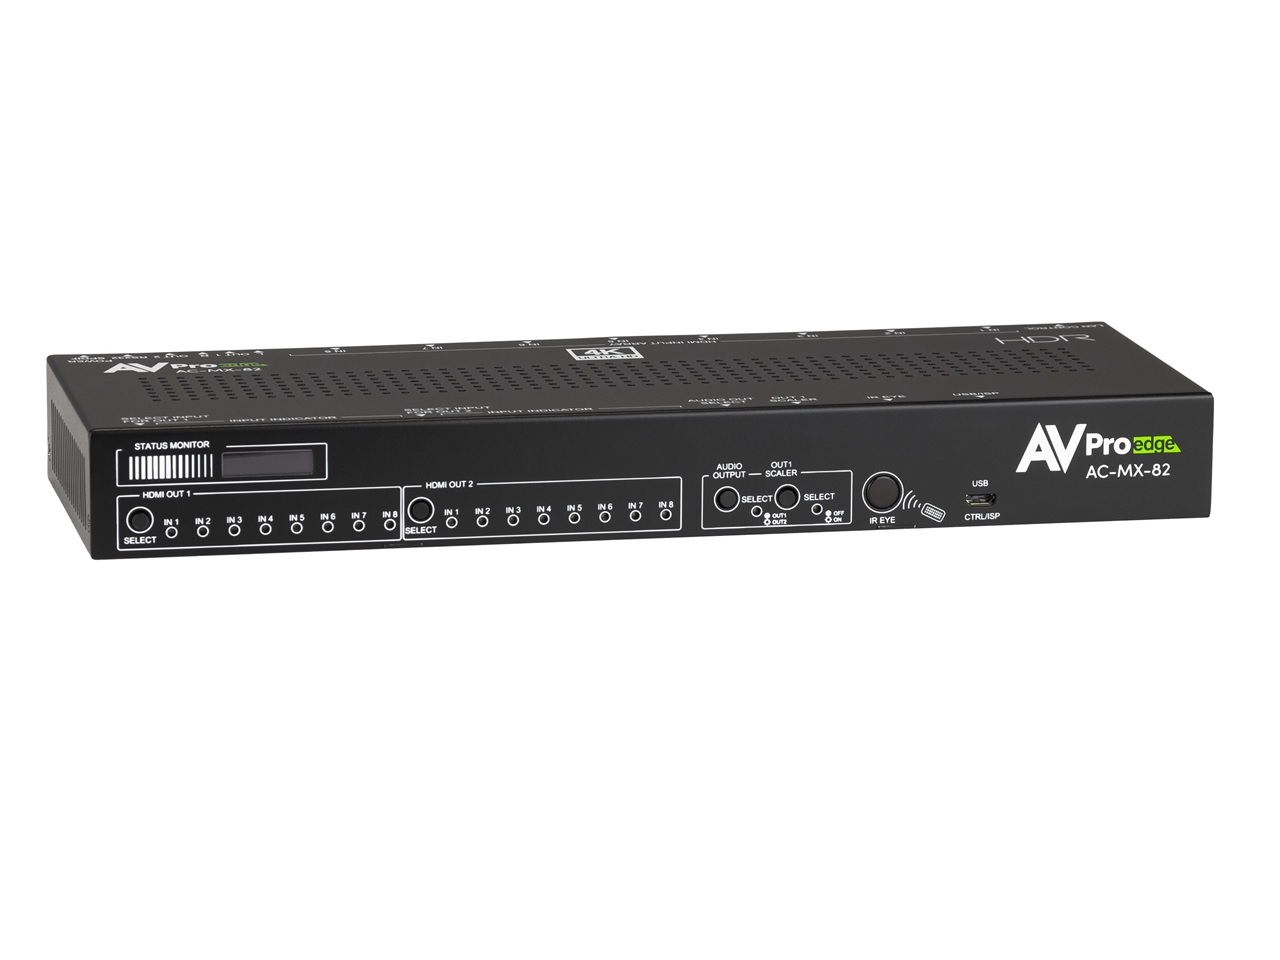 AVPro Edge AC-MX-82 18Gbps 4K60 8x2 Matrix Switch with Full HDR Support/Downscaling and Auto Sensing/Switching